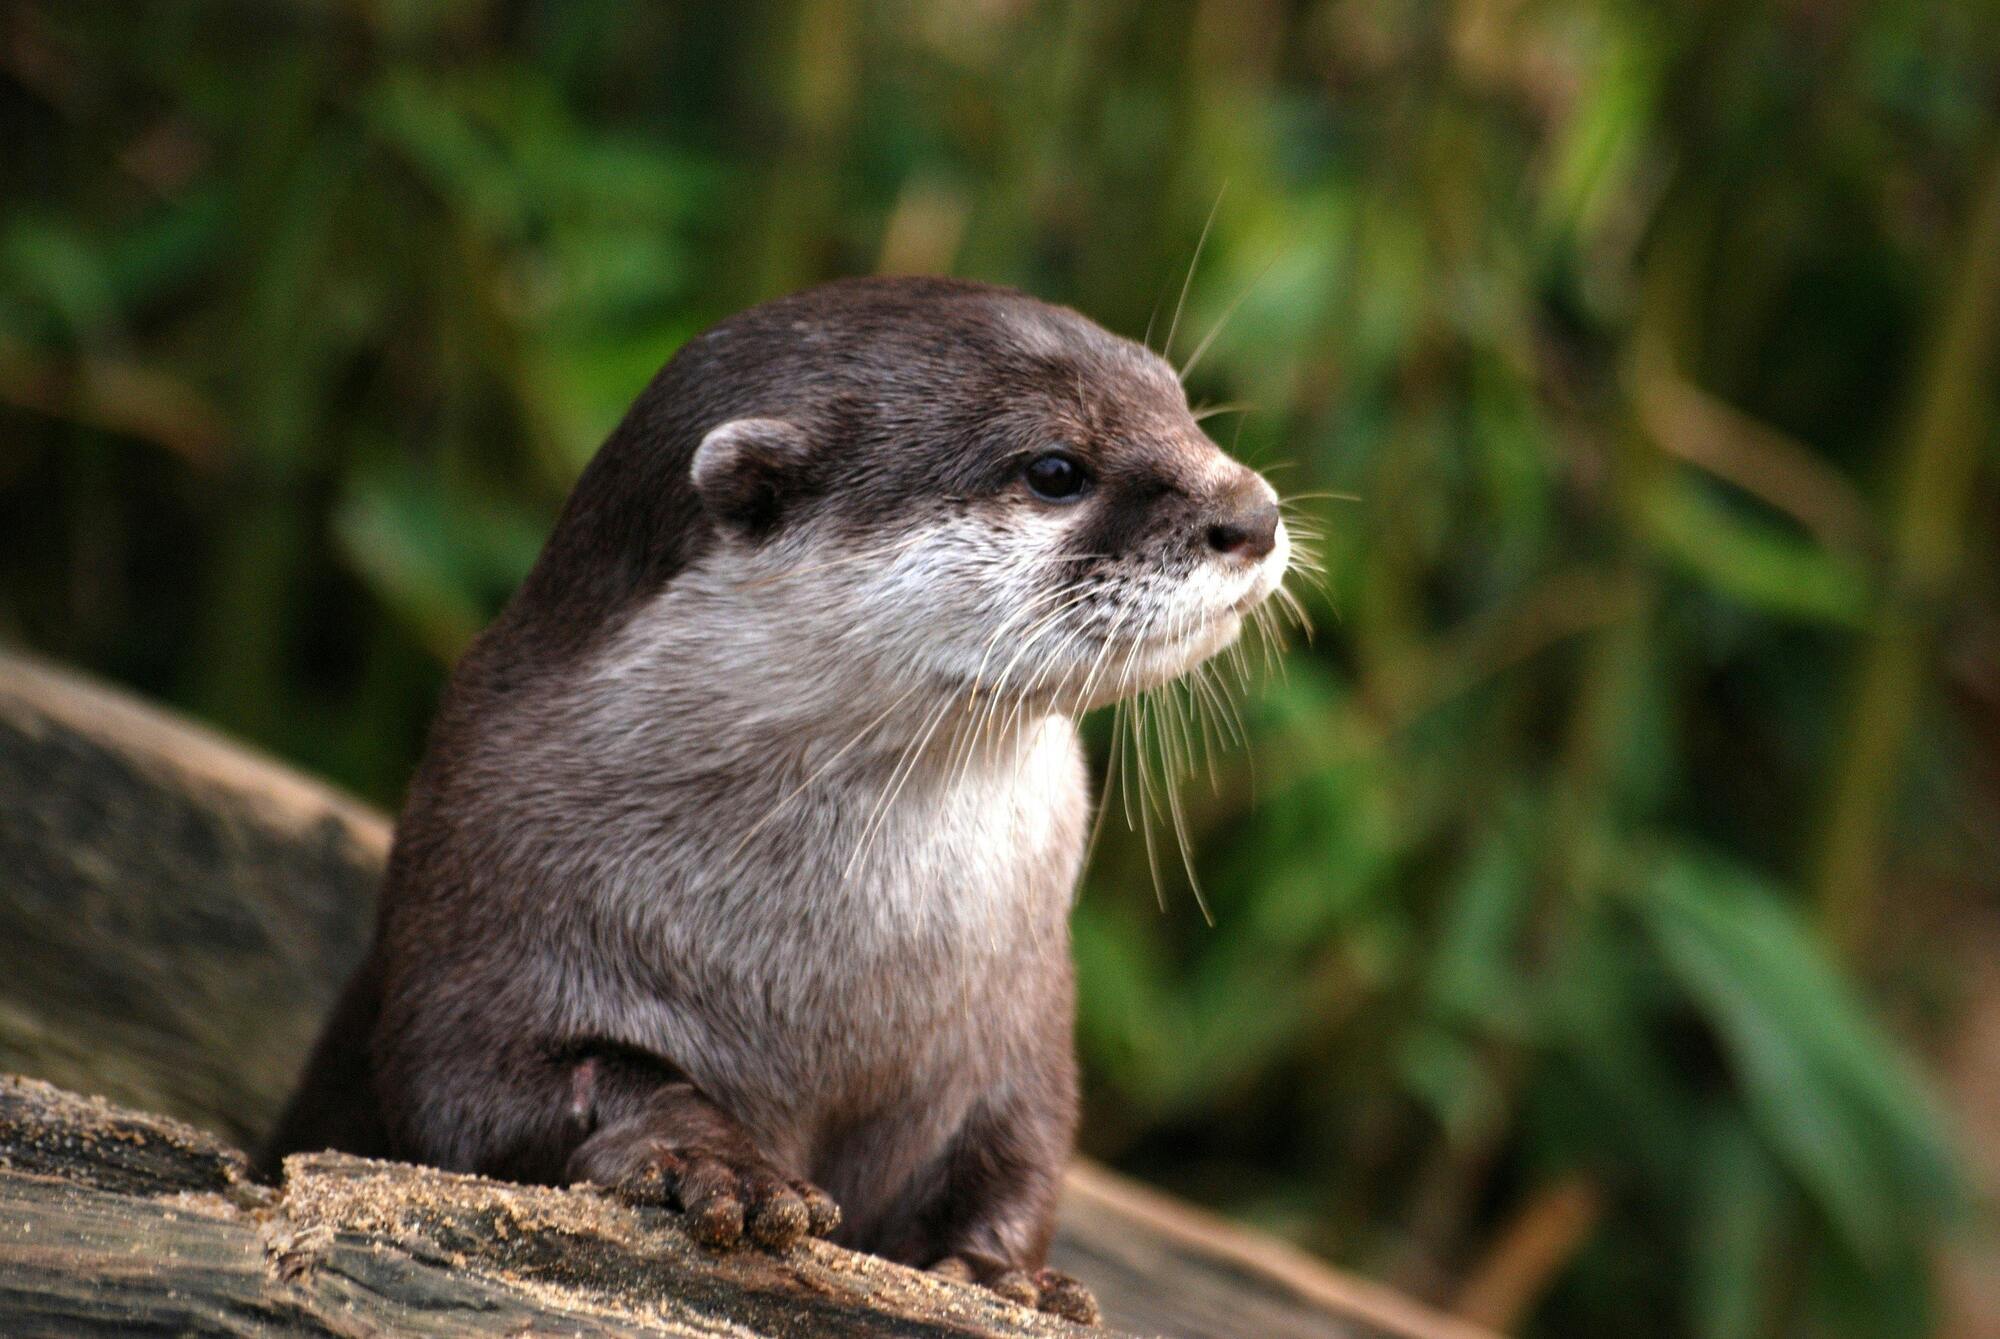 The otter is the spirit animal of Leo